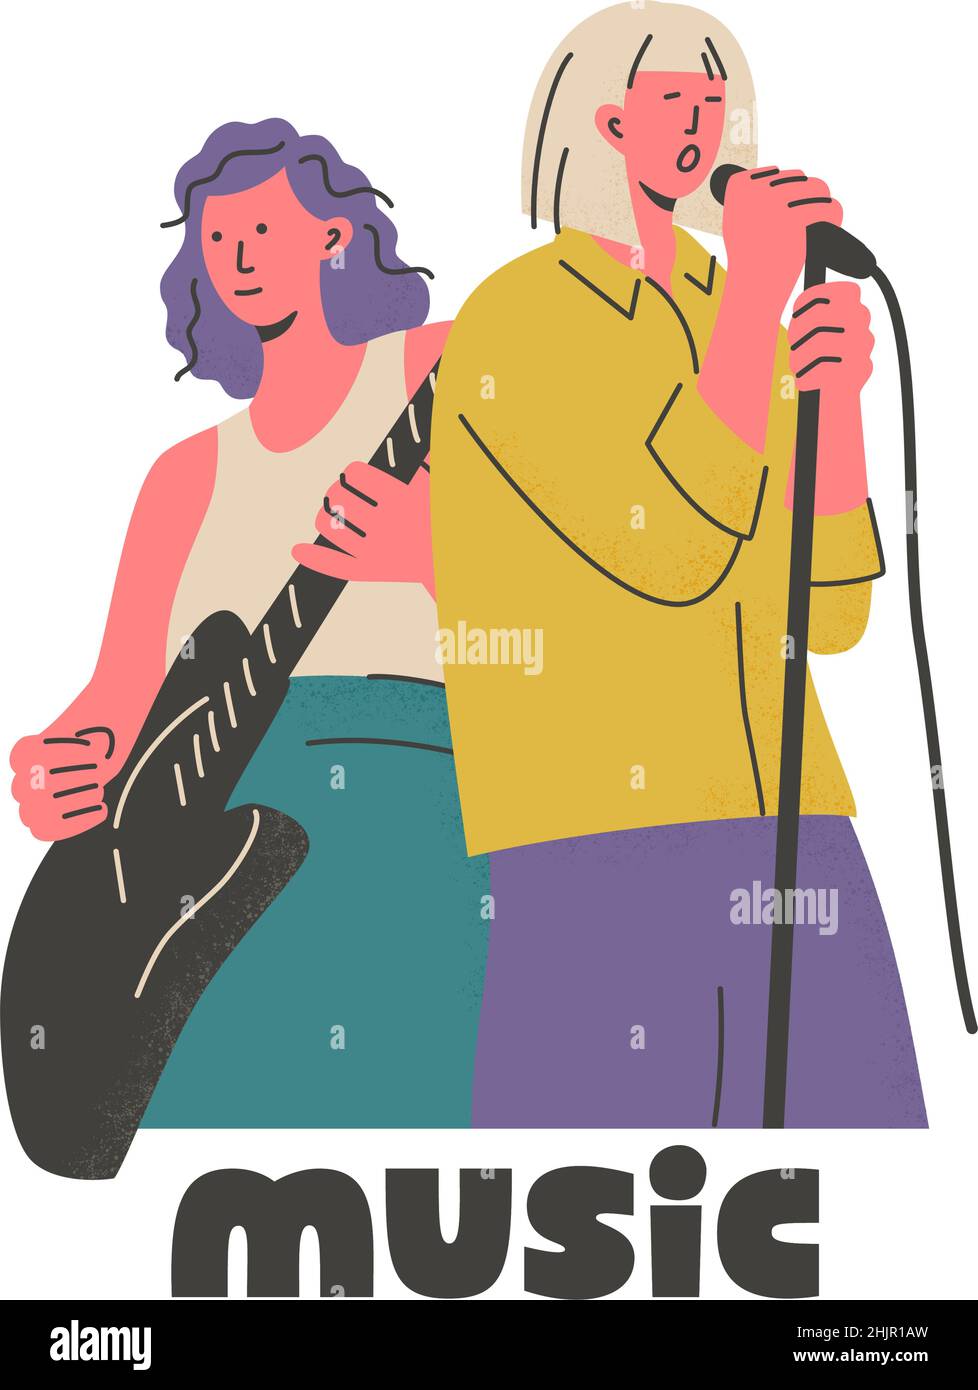 Musical festival poster with lettering. Hipster musicians playing the guitar and singing on stage. Musical performance or show. Rock band live concert Stock Vector